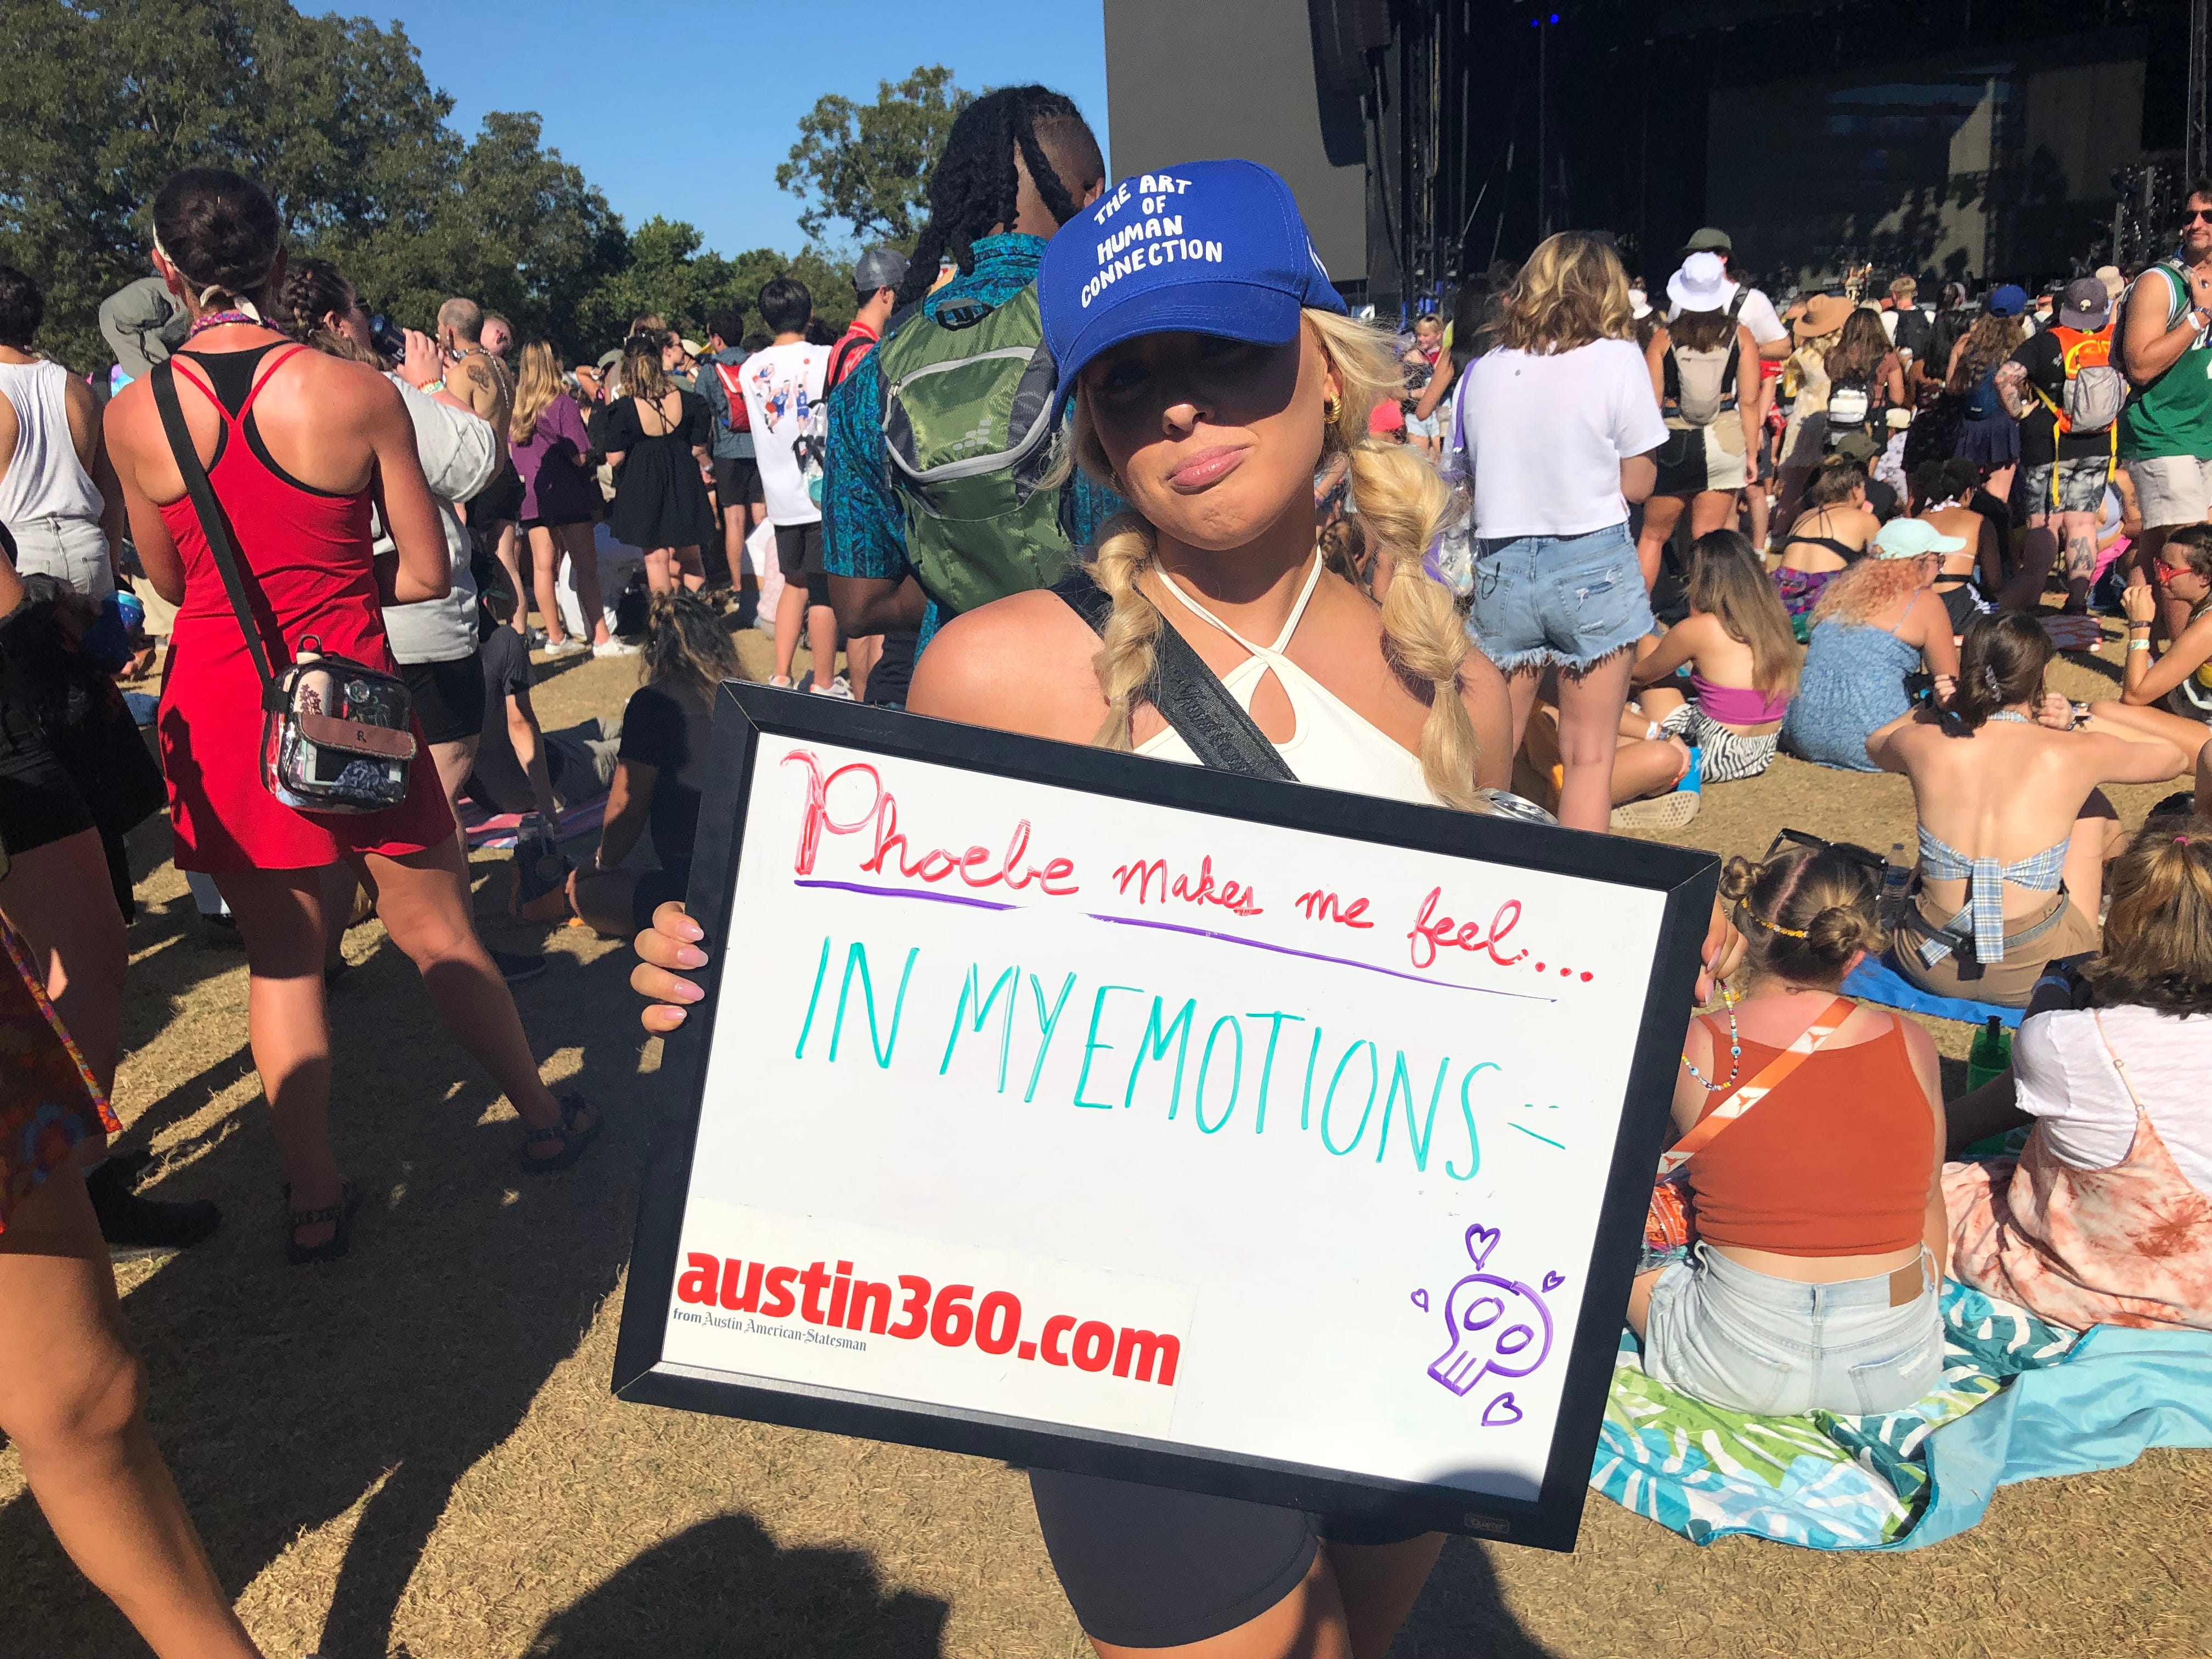 Christie Golden, 24, of Birmingham Alabama, waits for singer-songwriter Phoebe Bridgers to perform during Austin City Limits Music Festival on Oct. 9, 2021.